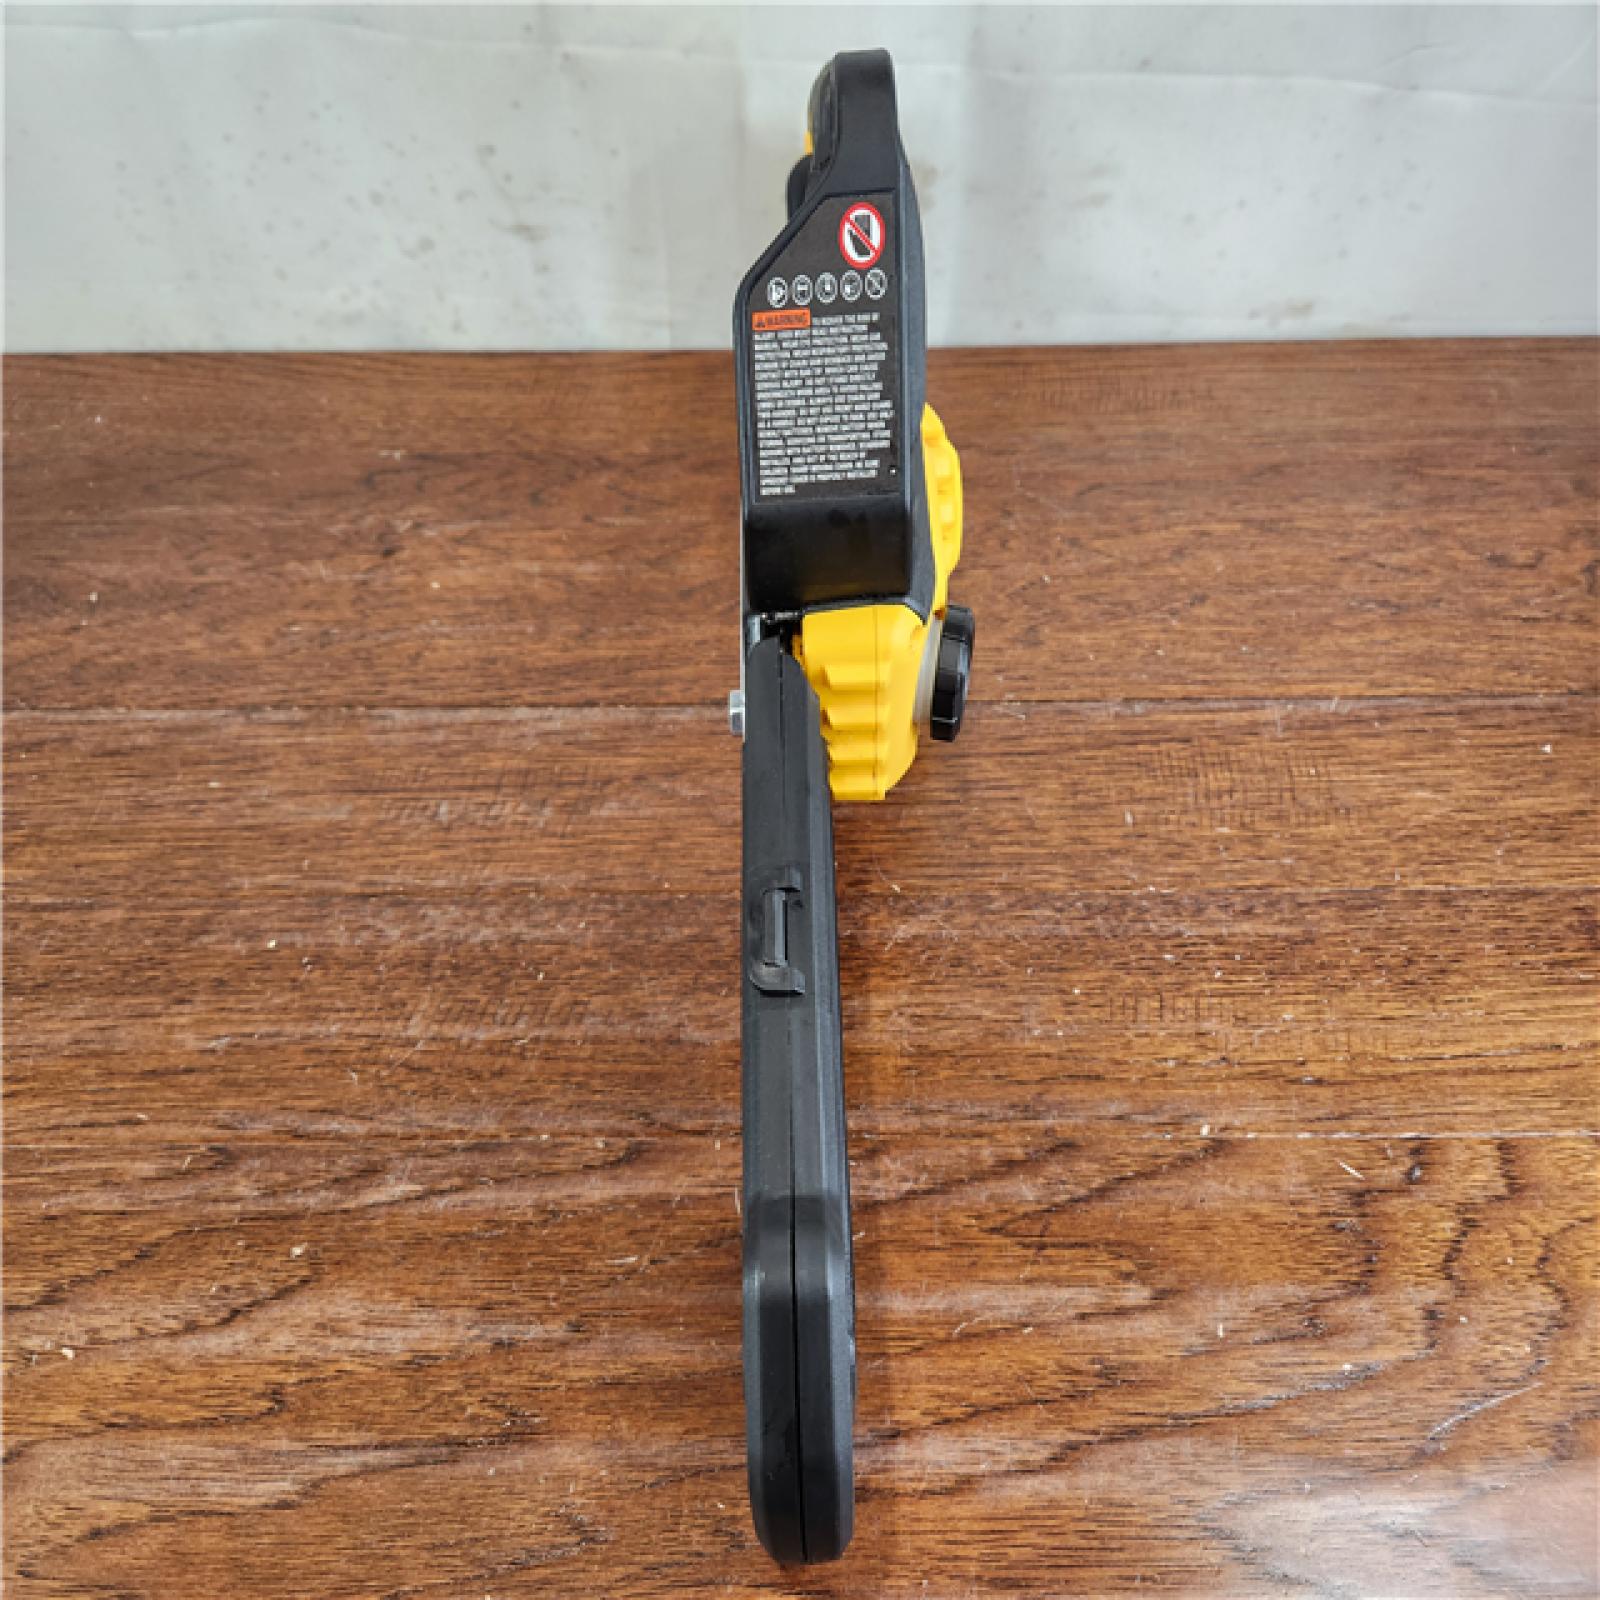 AS-IS DEWALT 20V MAX Brushless Cordless 8 Pruning Chainsaw (Tool Only)